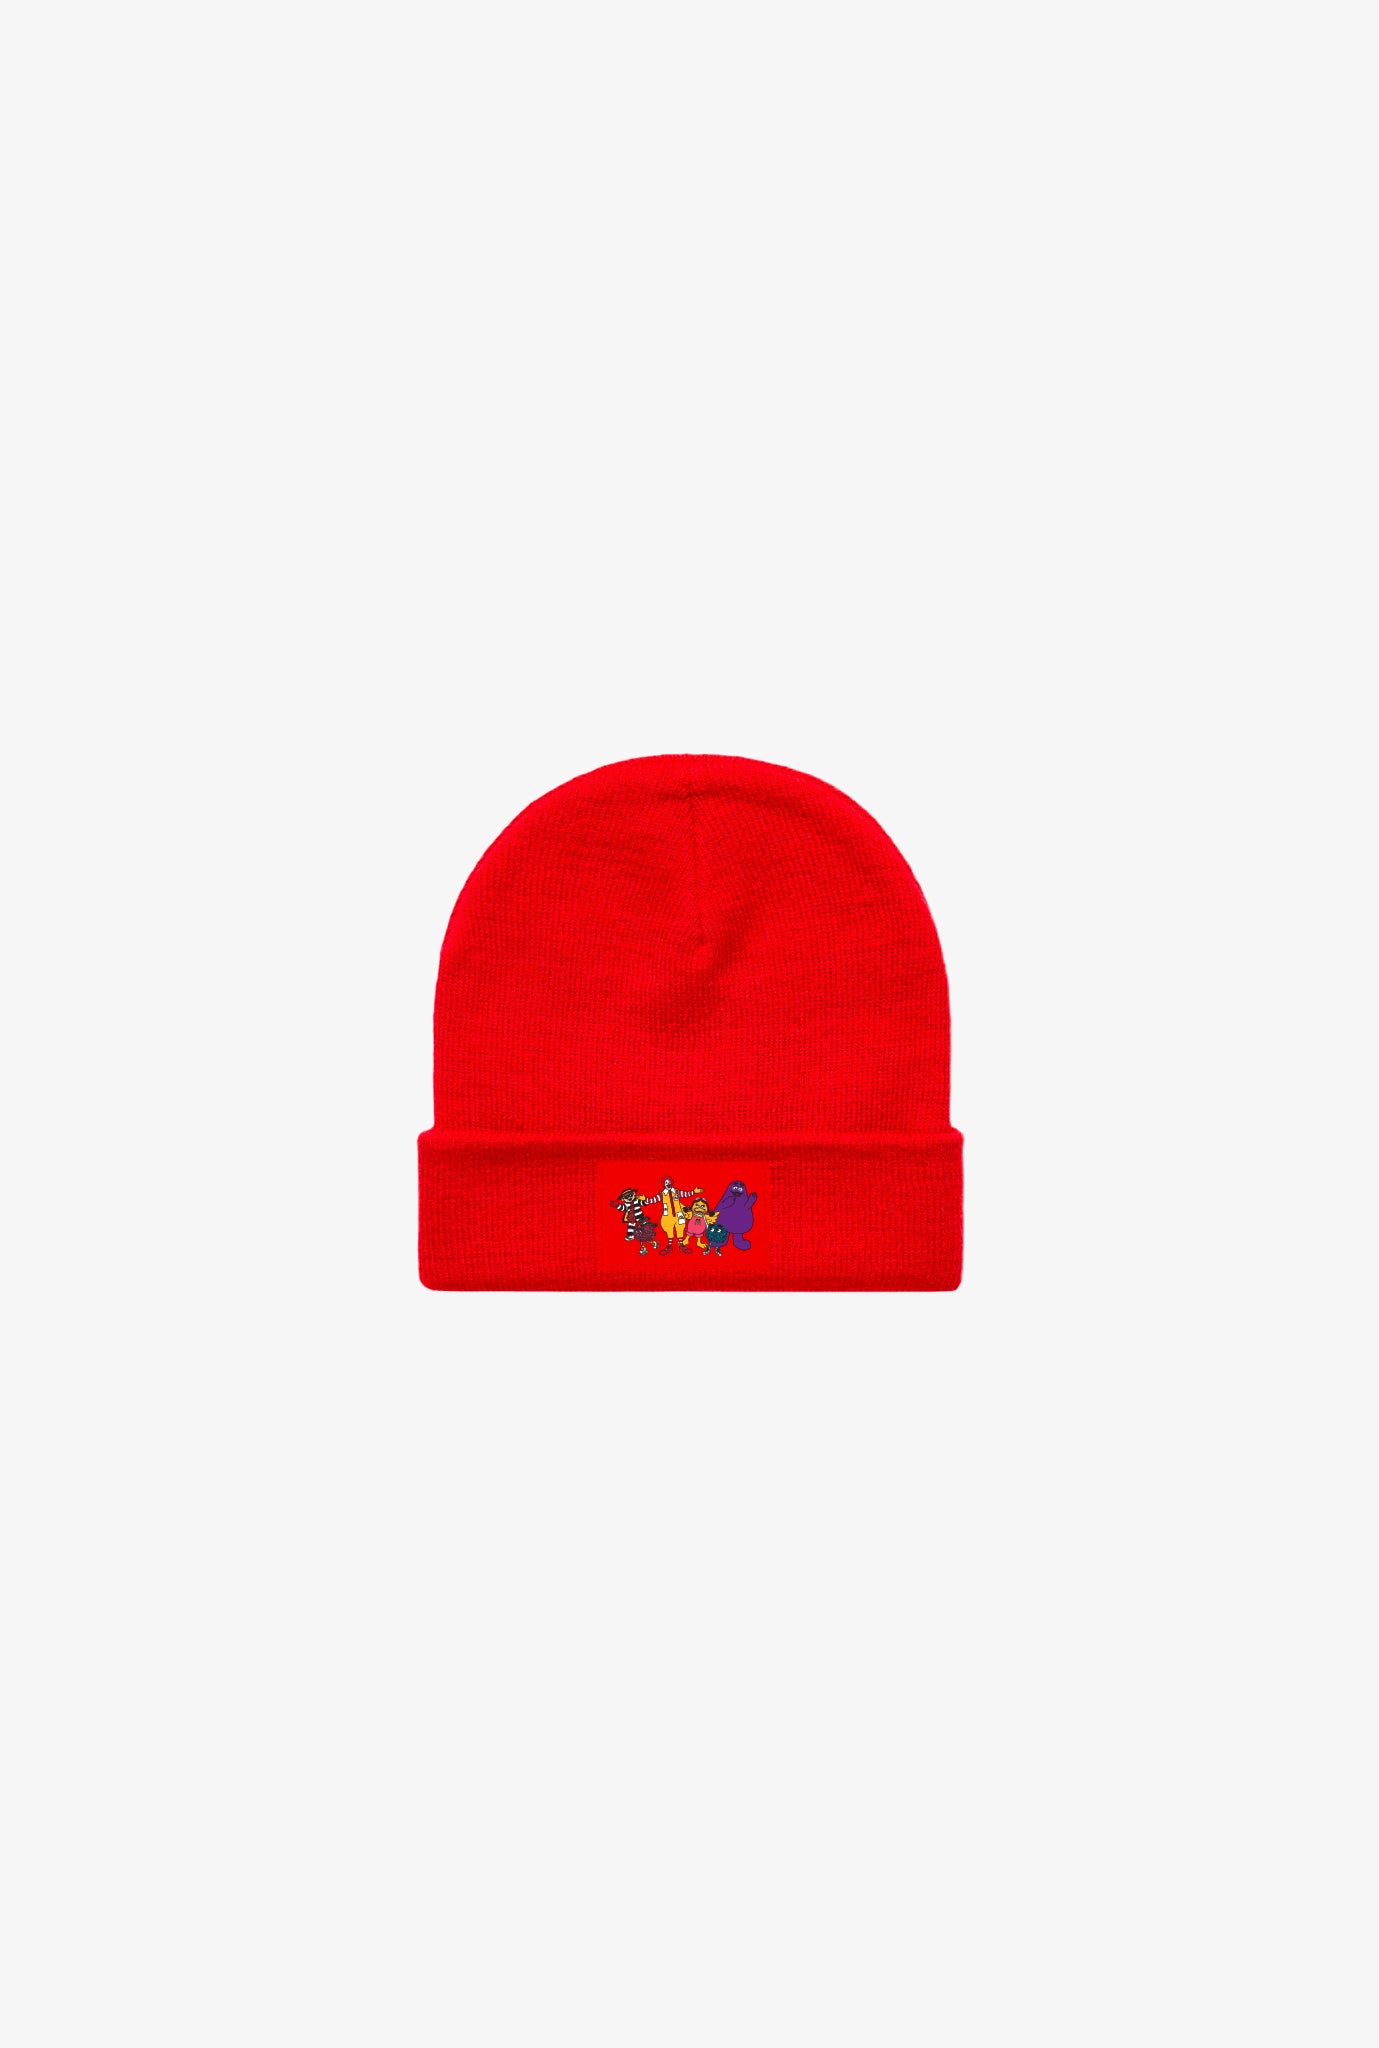 P/C x McDonald's Better Together Toque - Red